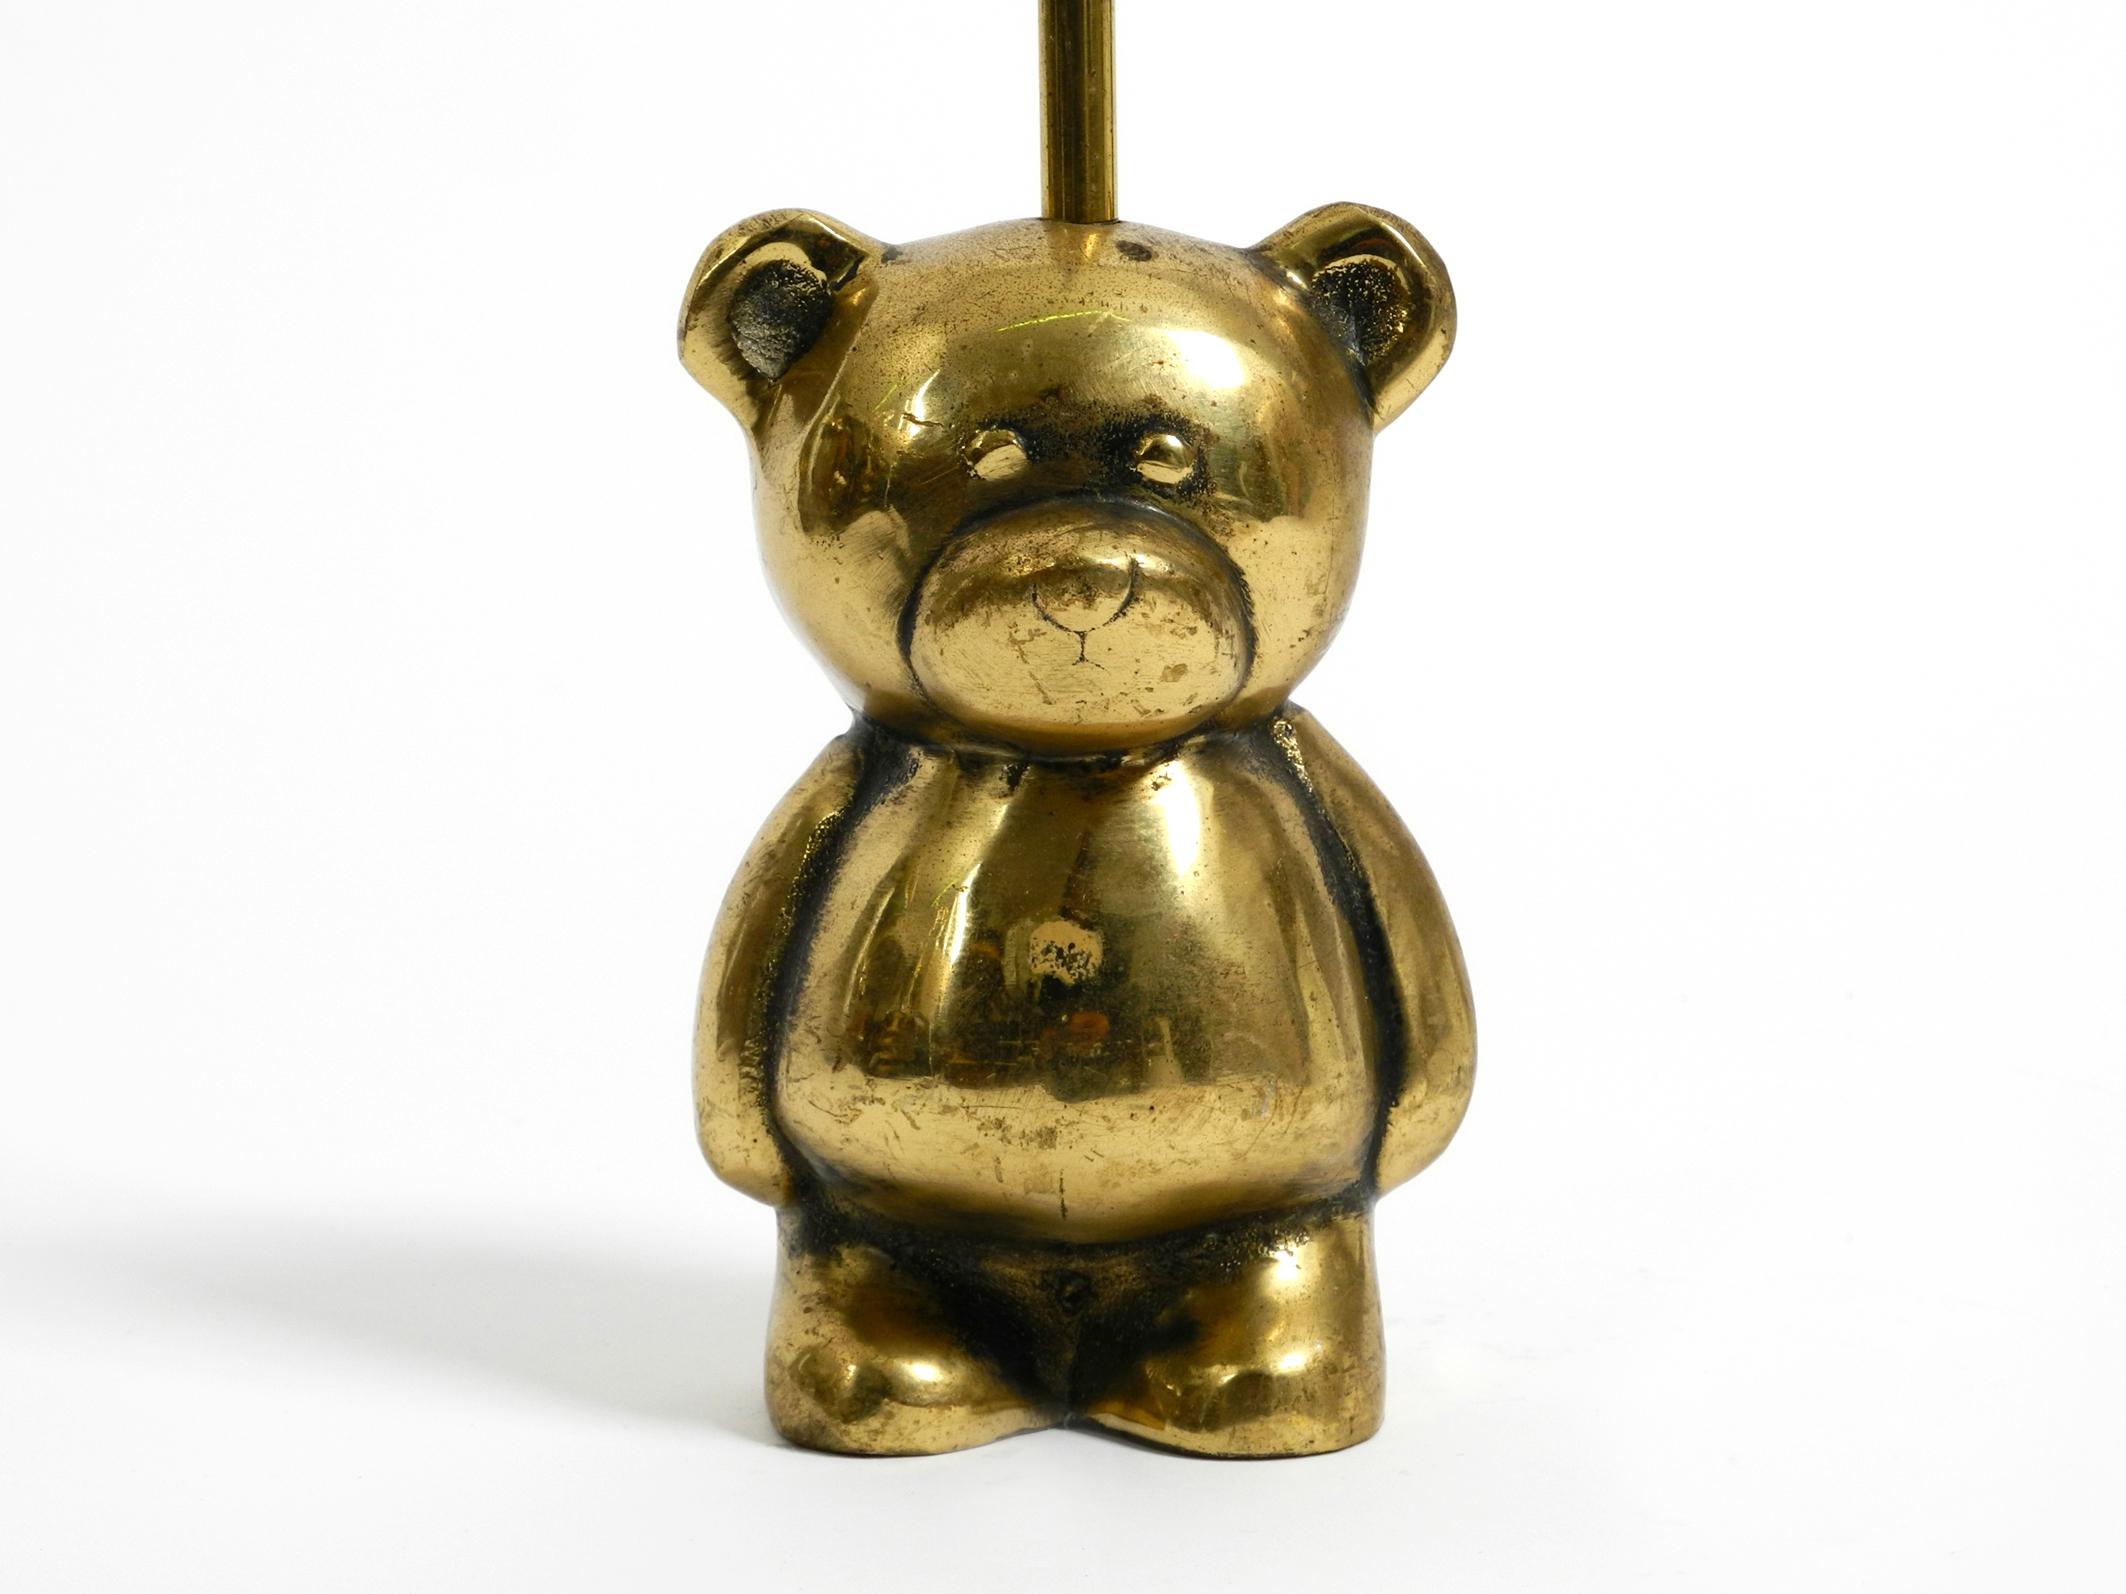 Mid-Century Modern Very Heavy Solid Brass Doorstop from the 1960s in the Shape of a Cute Teddy Bear